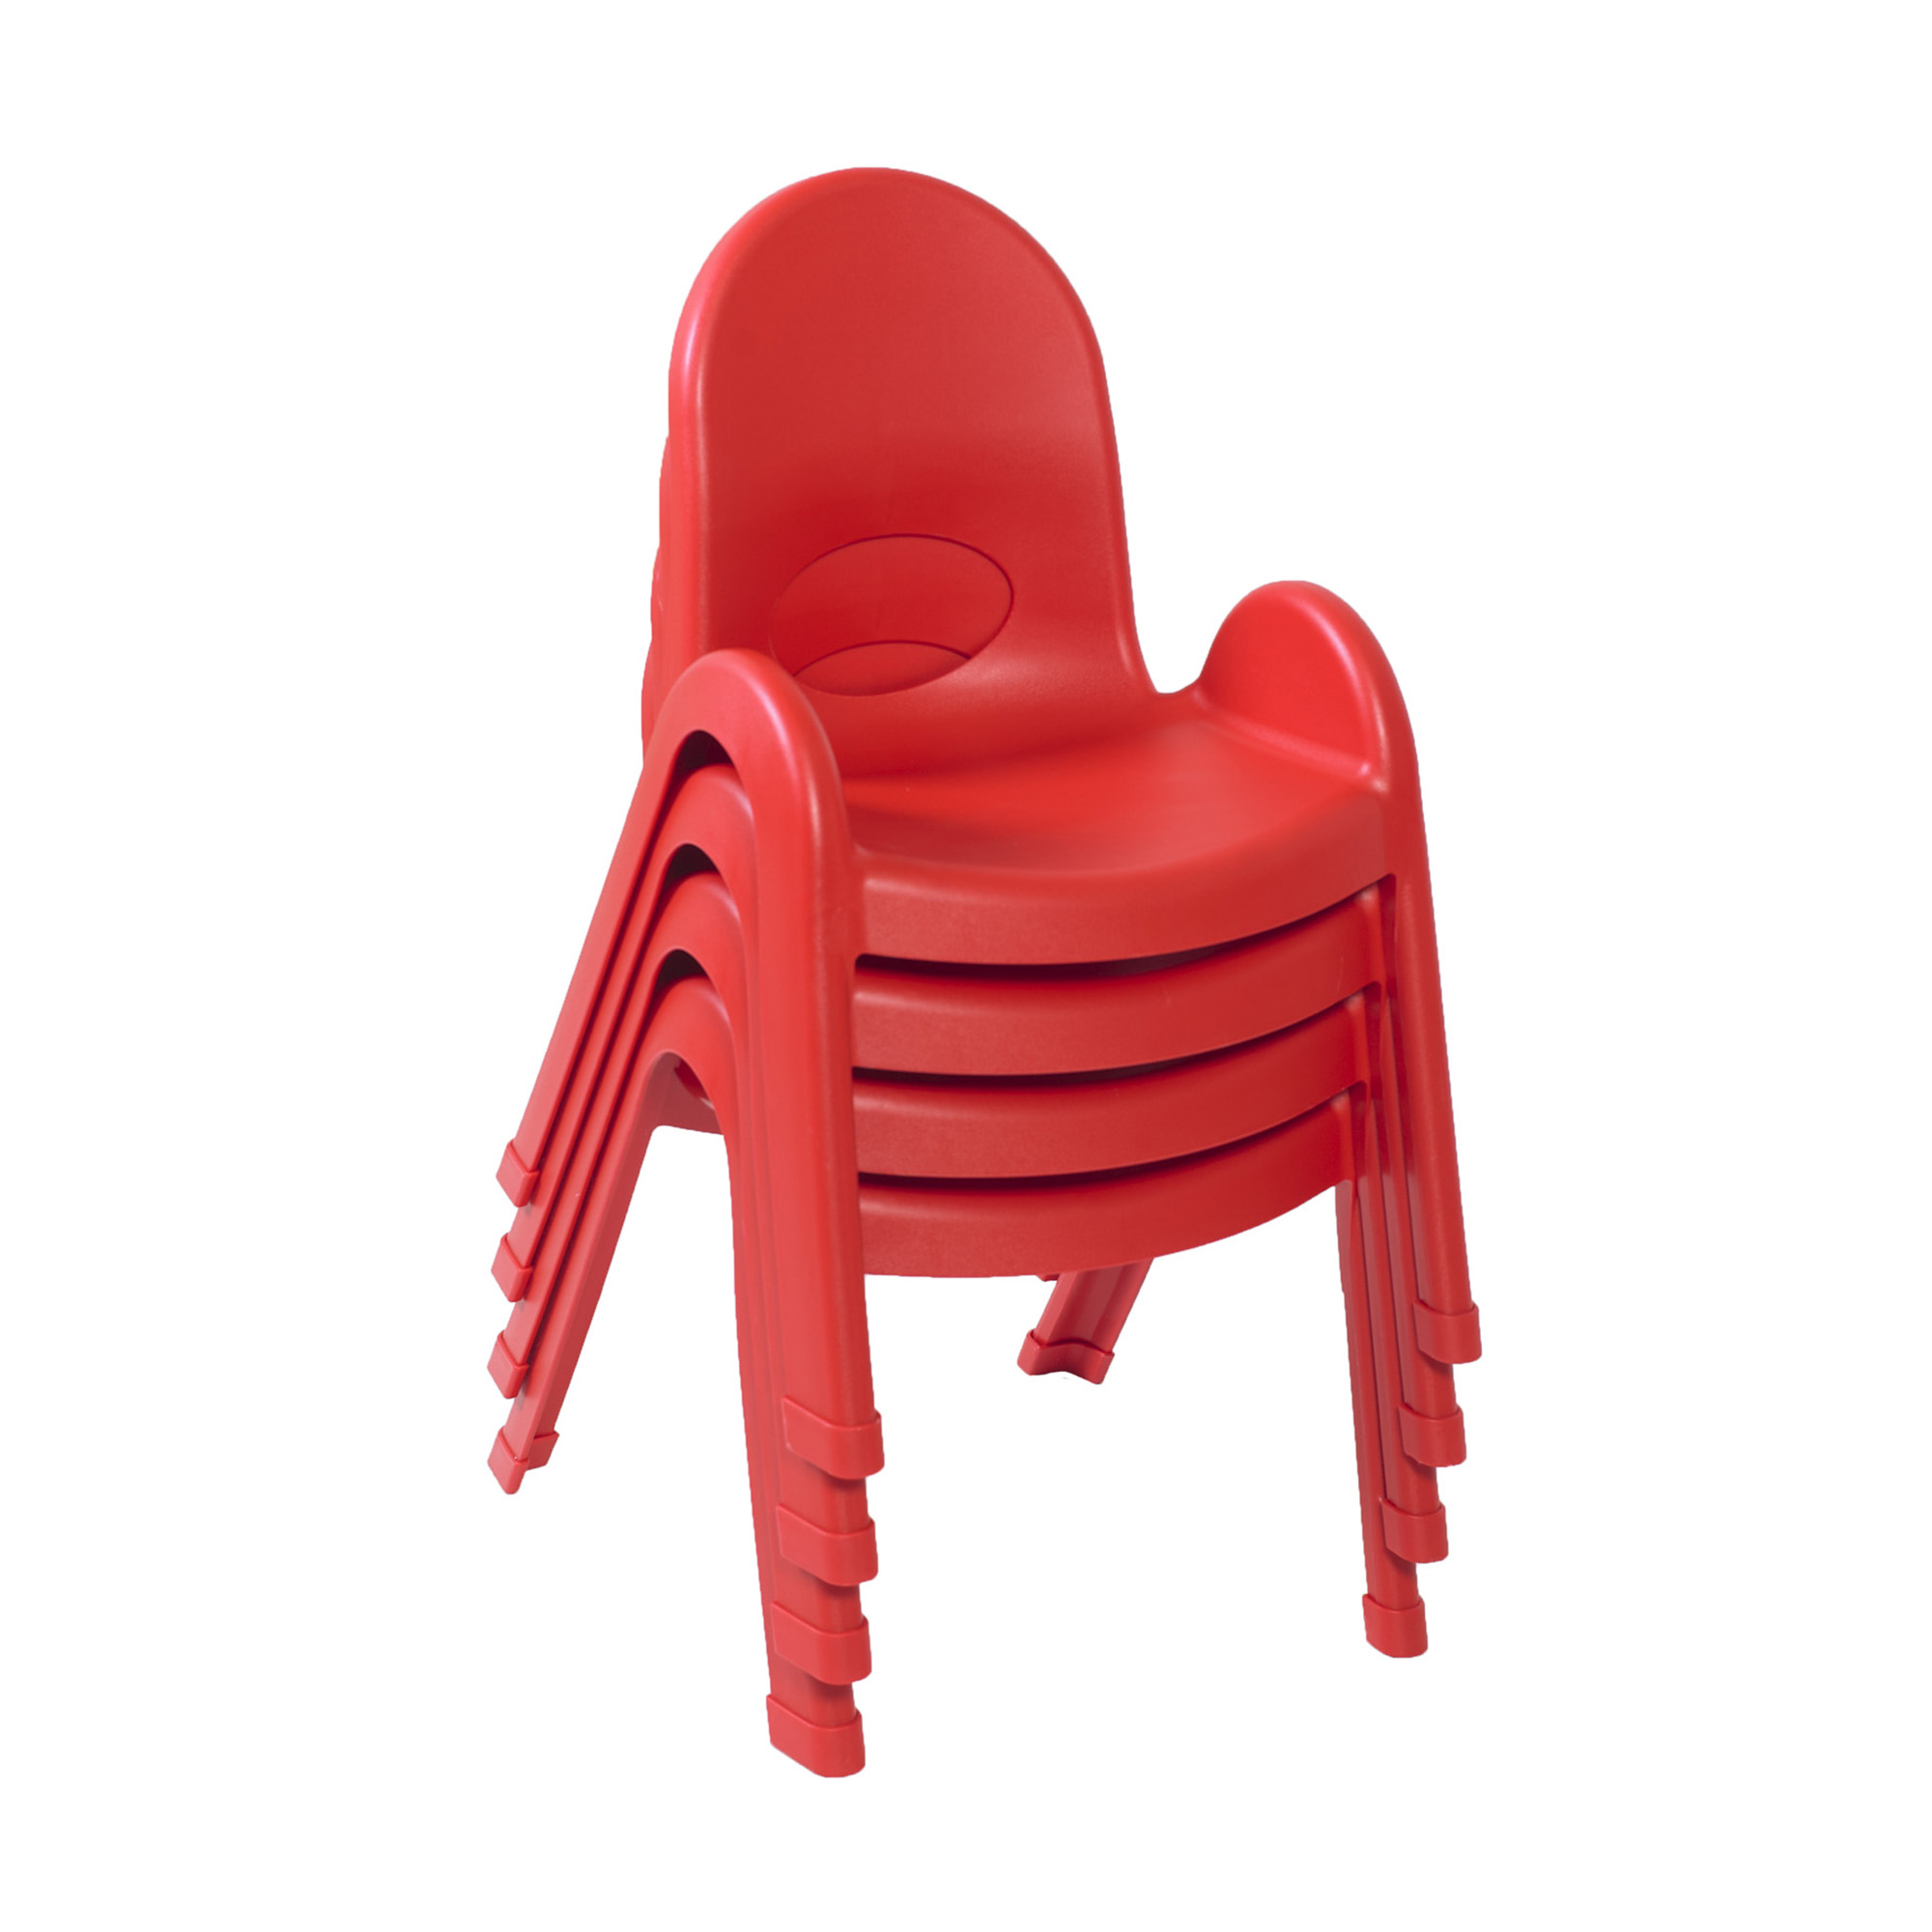 Value Stack™ 23 cm  Chair - 4 Pack - Candy Apple Red